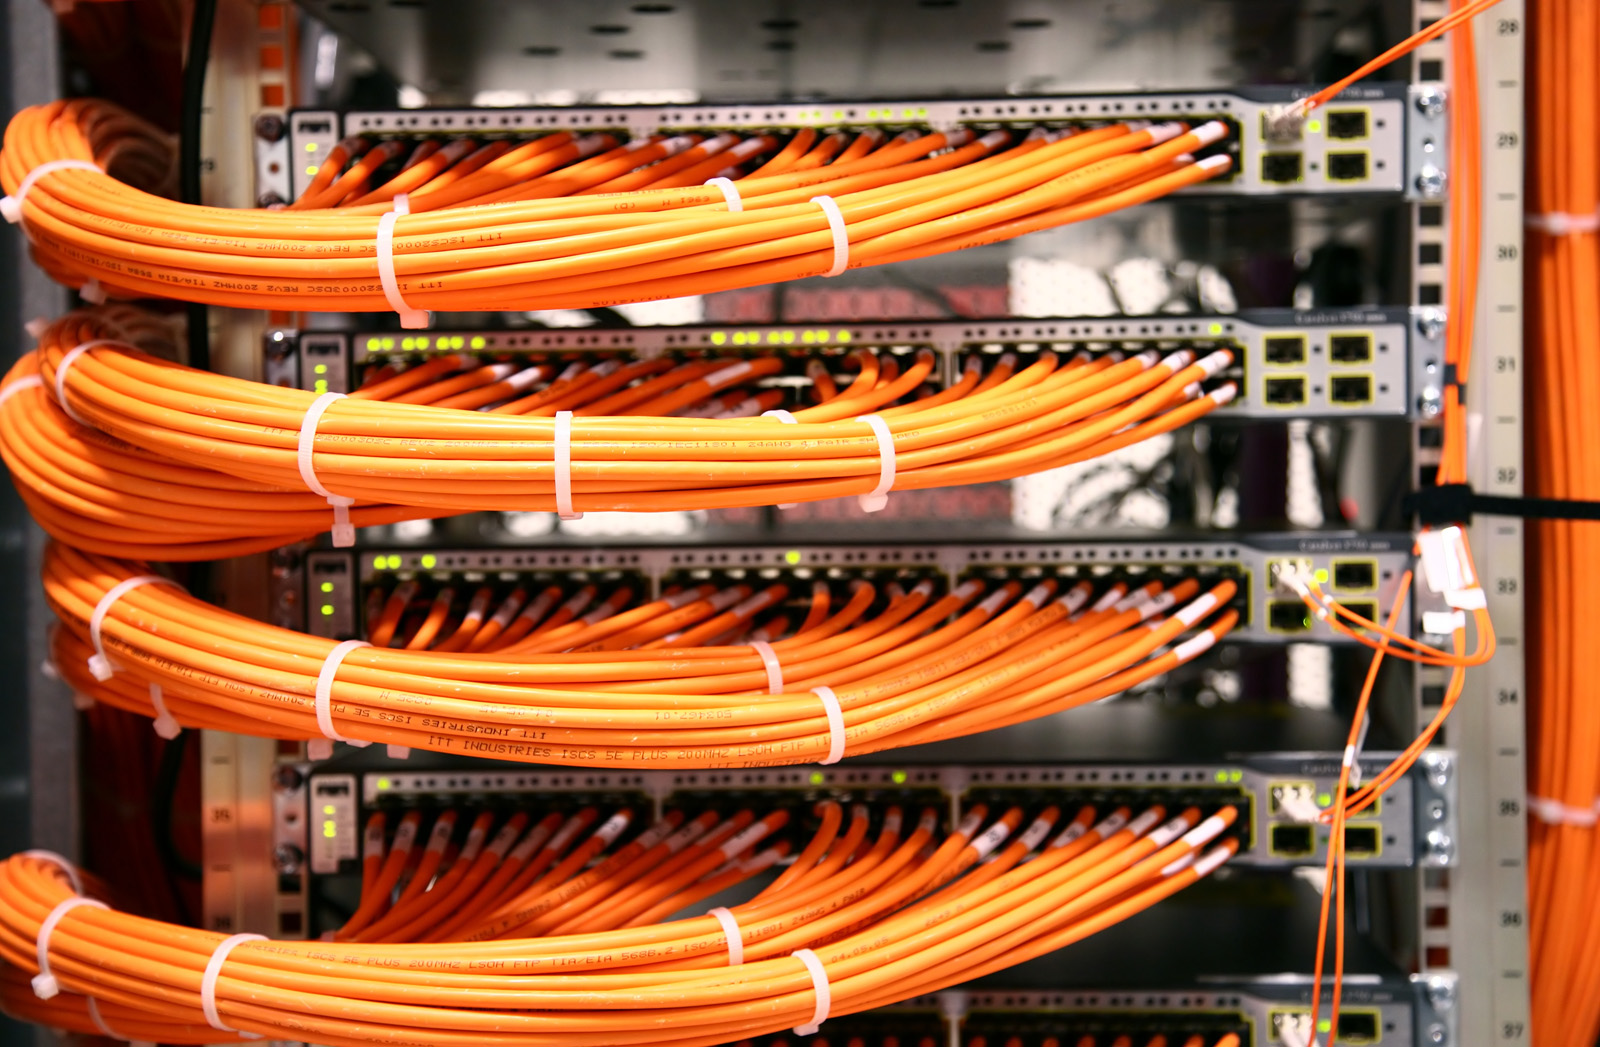 Dublin GA Top Choice Onsite Voice & Data Network Cabling, Low Voltage Services